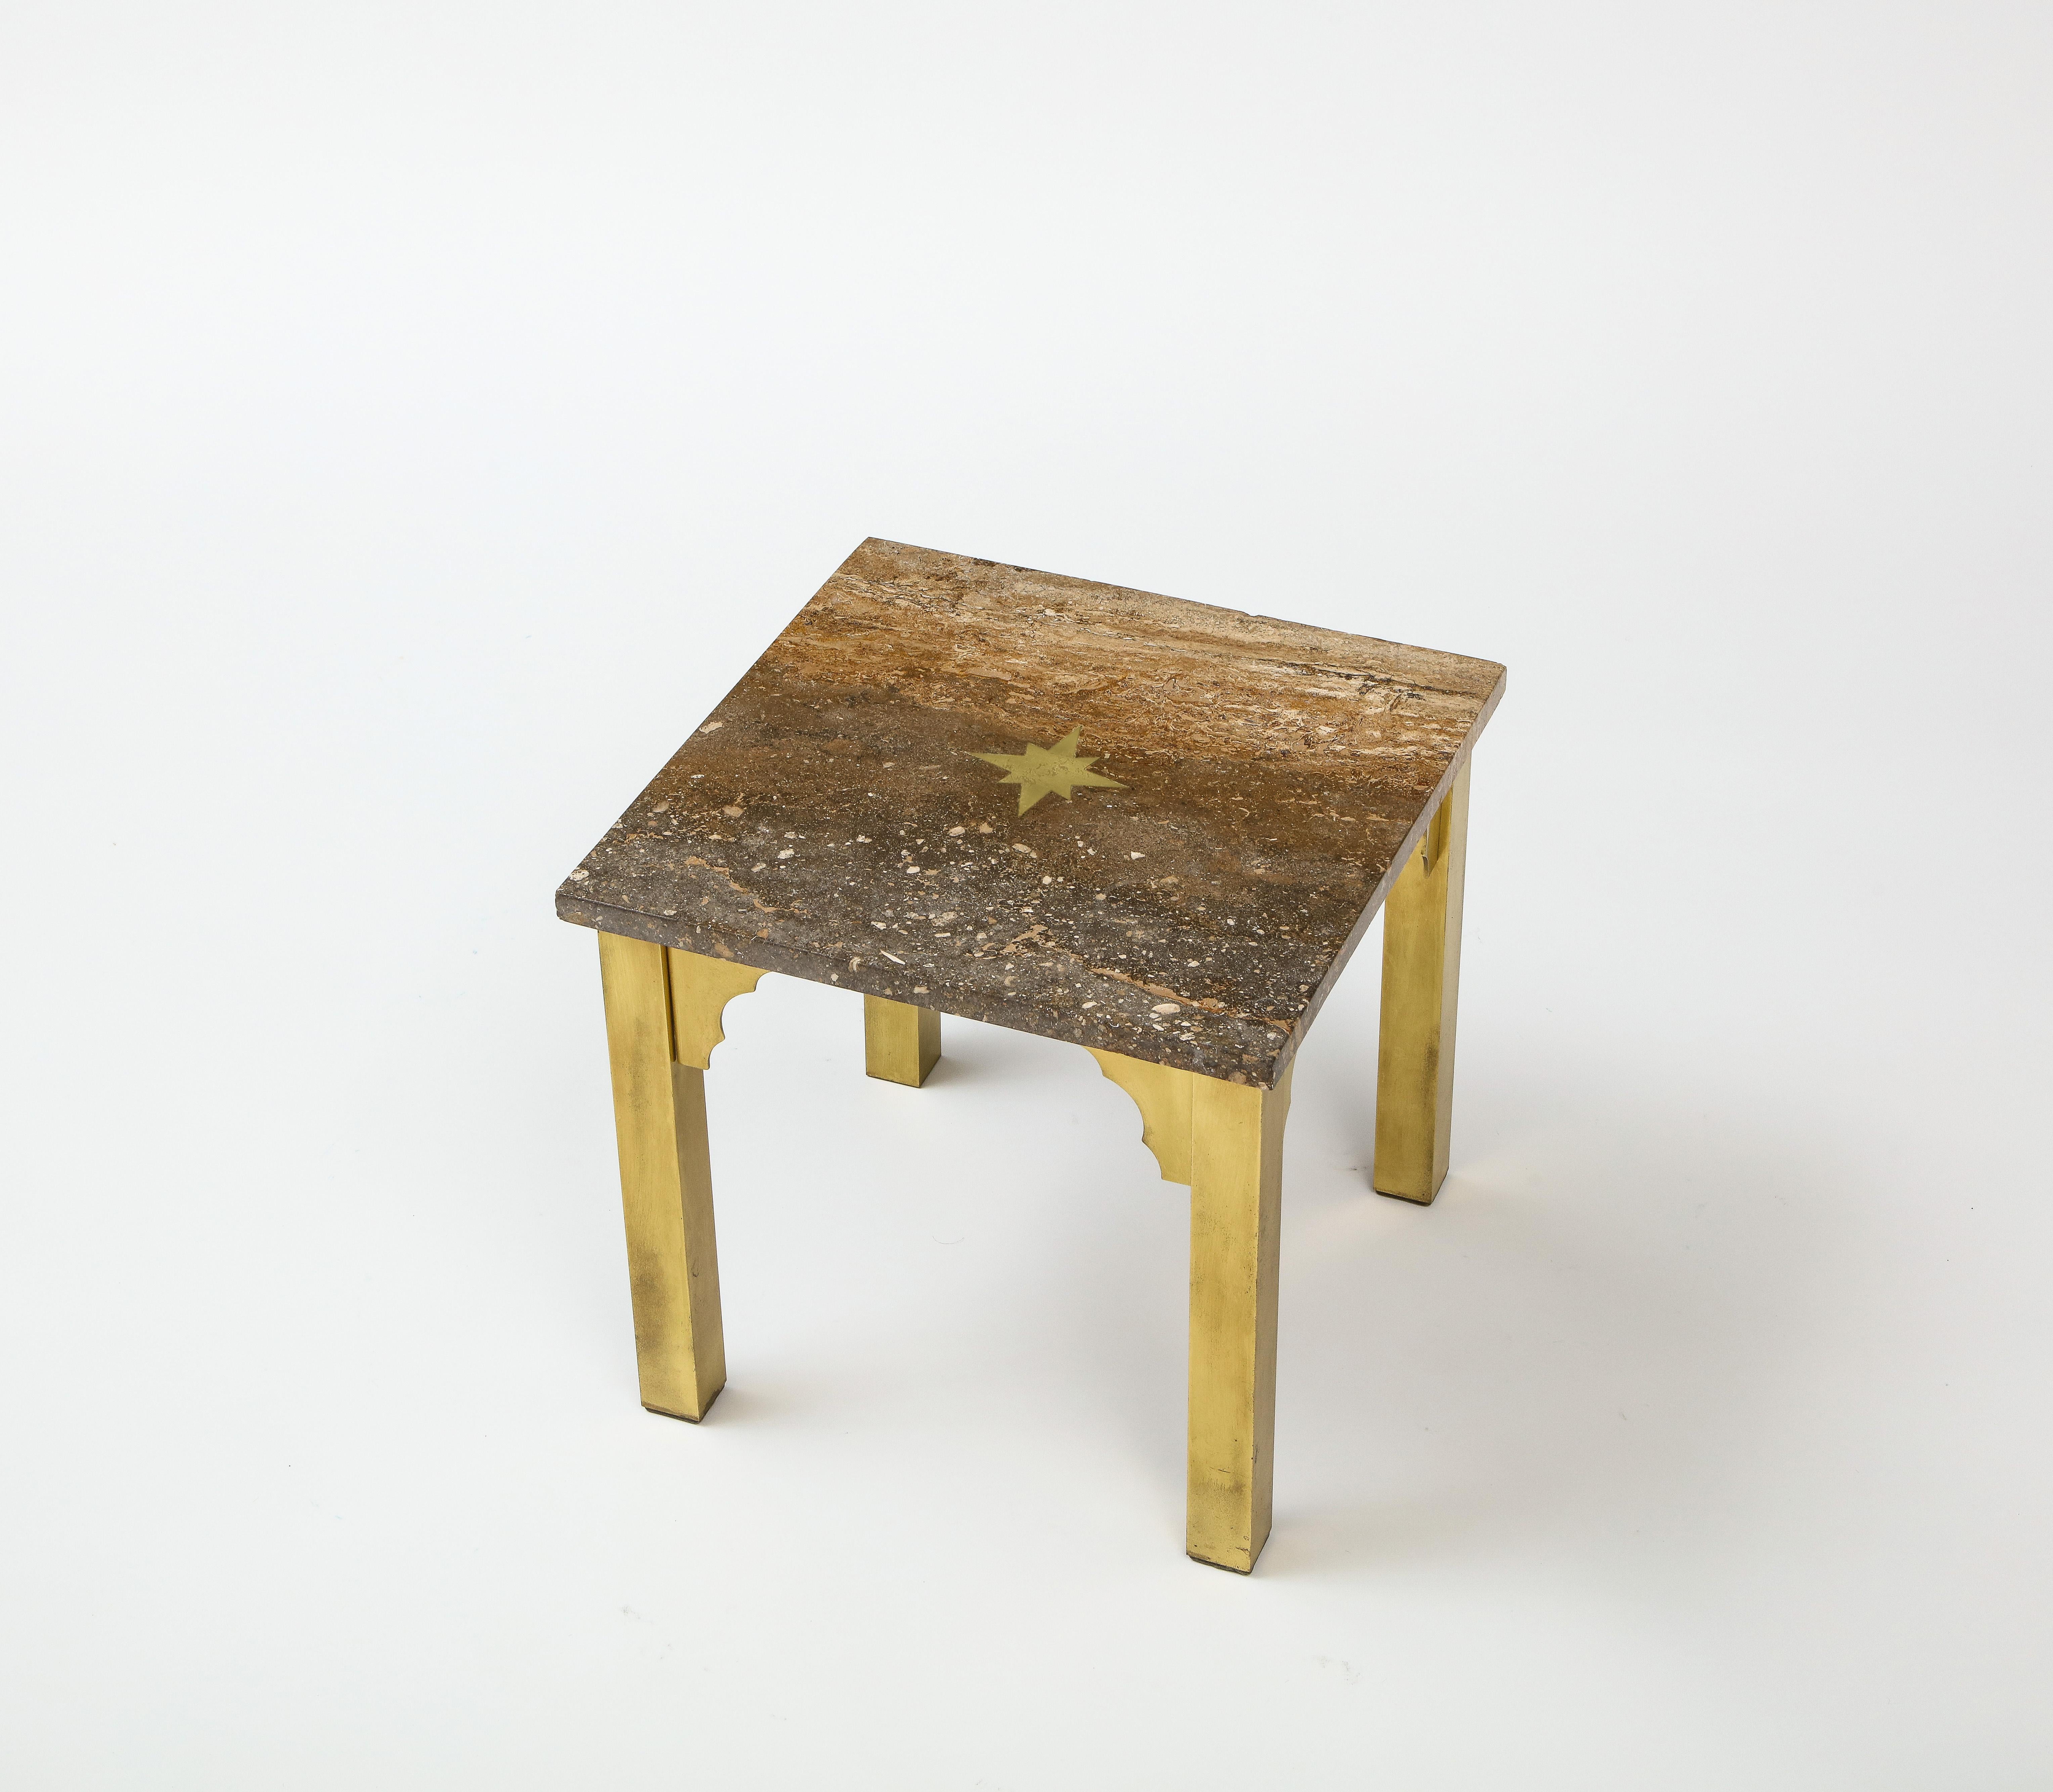 Small Square Table in Brass & Travertine, Inlay & Arabesque Details, USA 1960's For Sale 2